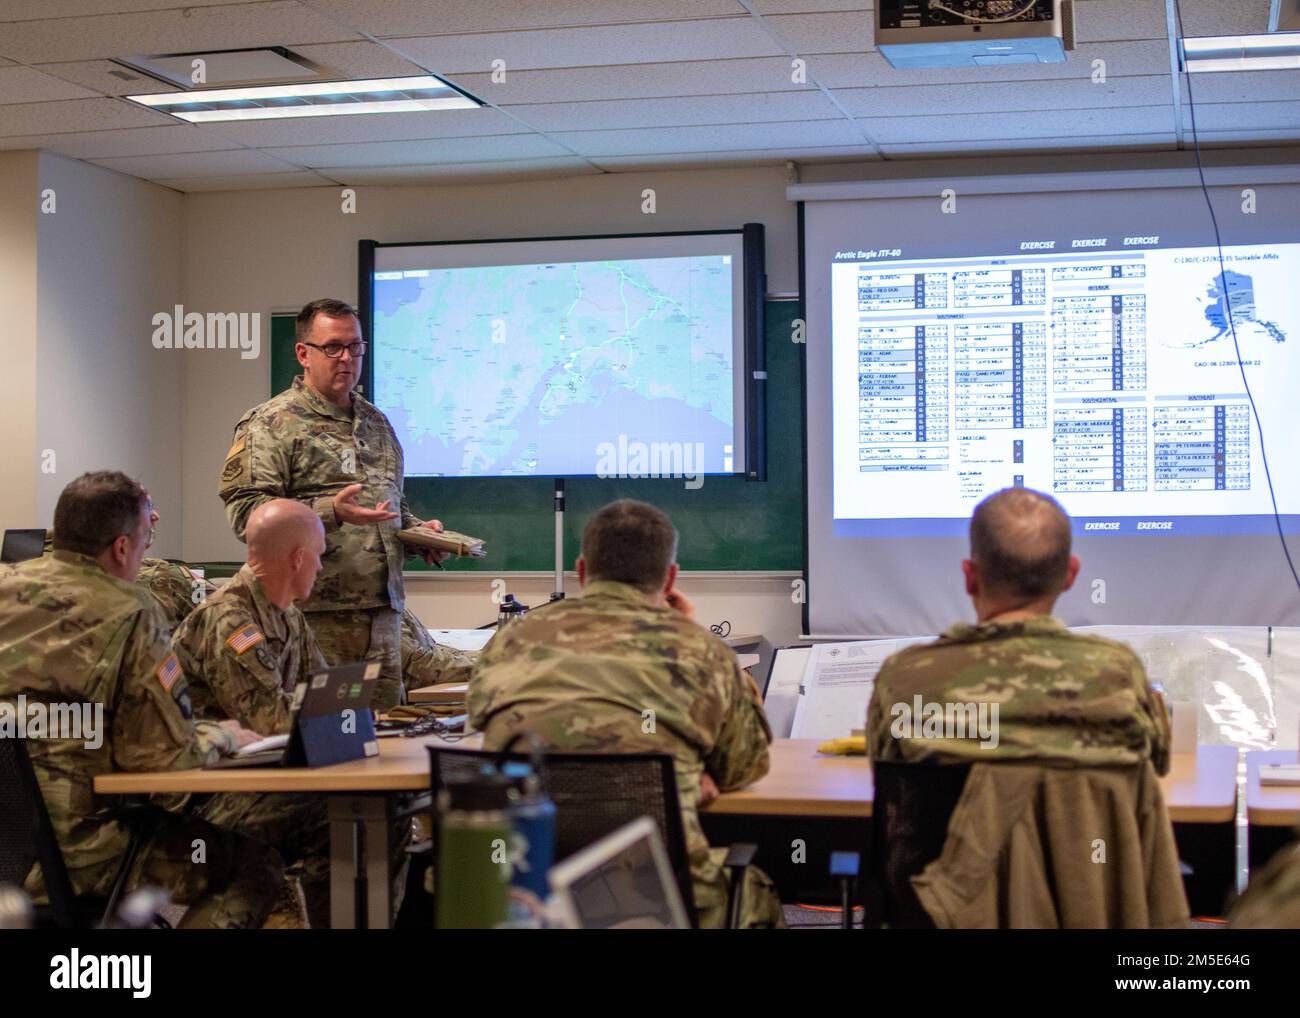 U.S. Air Force Lt. Col. Robert Andrews, with the 145th Air Wing, North Carolina National Guard, briefs air operations during Arctic Eagle-Patriot 2022 (AEP22) at the Alaska National Guard Joint Force Headquarters on Joint Base Elmendorf-Richardson, March 5, 2022. Exercise AEP22 increases the National Guard’s capacity to operate in austere, extreme cold-weather environments across Alaska and the Arctic region. AEP22 enhances the ability of military and civilian interagency partners to respond to a variety of emergency and homeland security missions across Alaska and the Arctic. Stock Photo